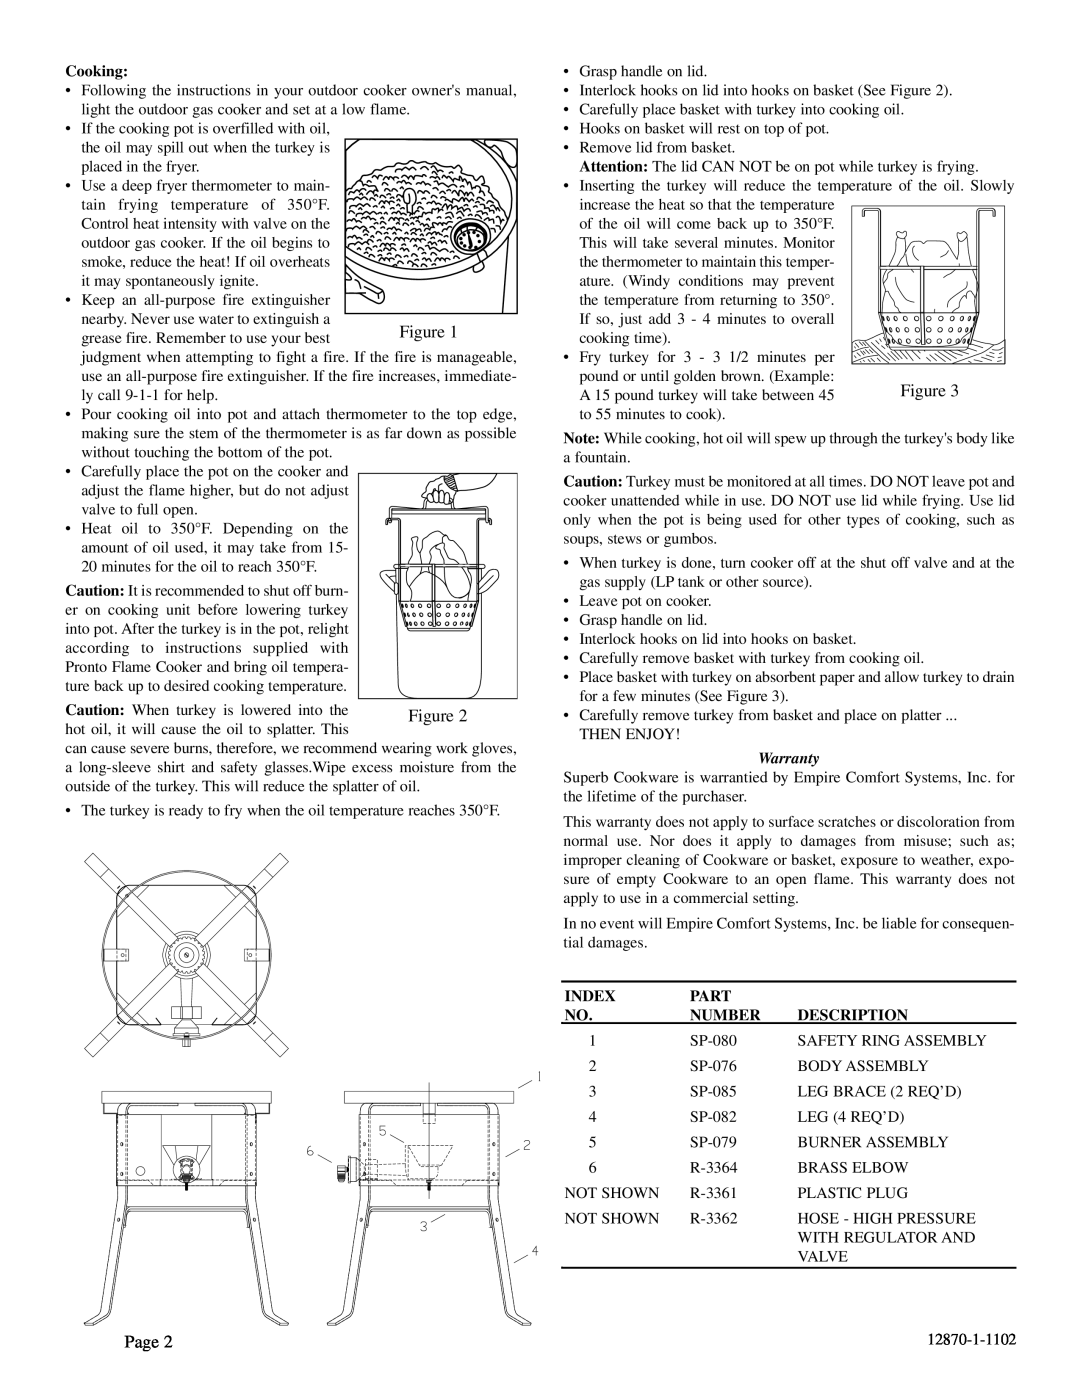 Empire Comfort Systems TF-100 manual Page, Cooking, Warranty, Index, Part, Description 